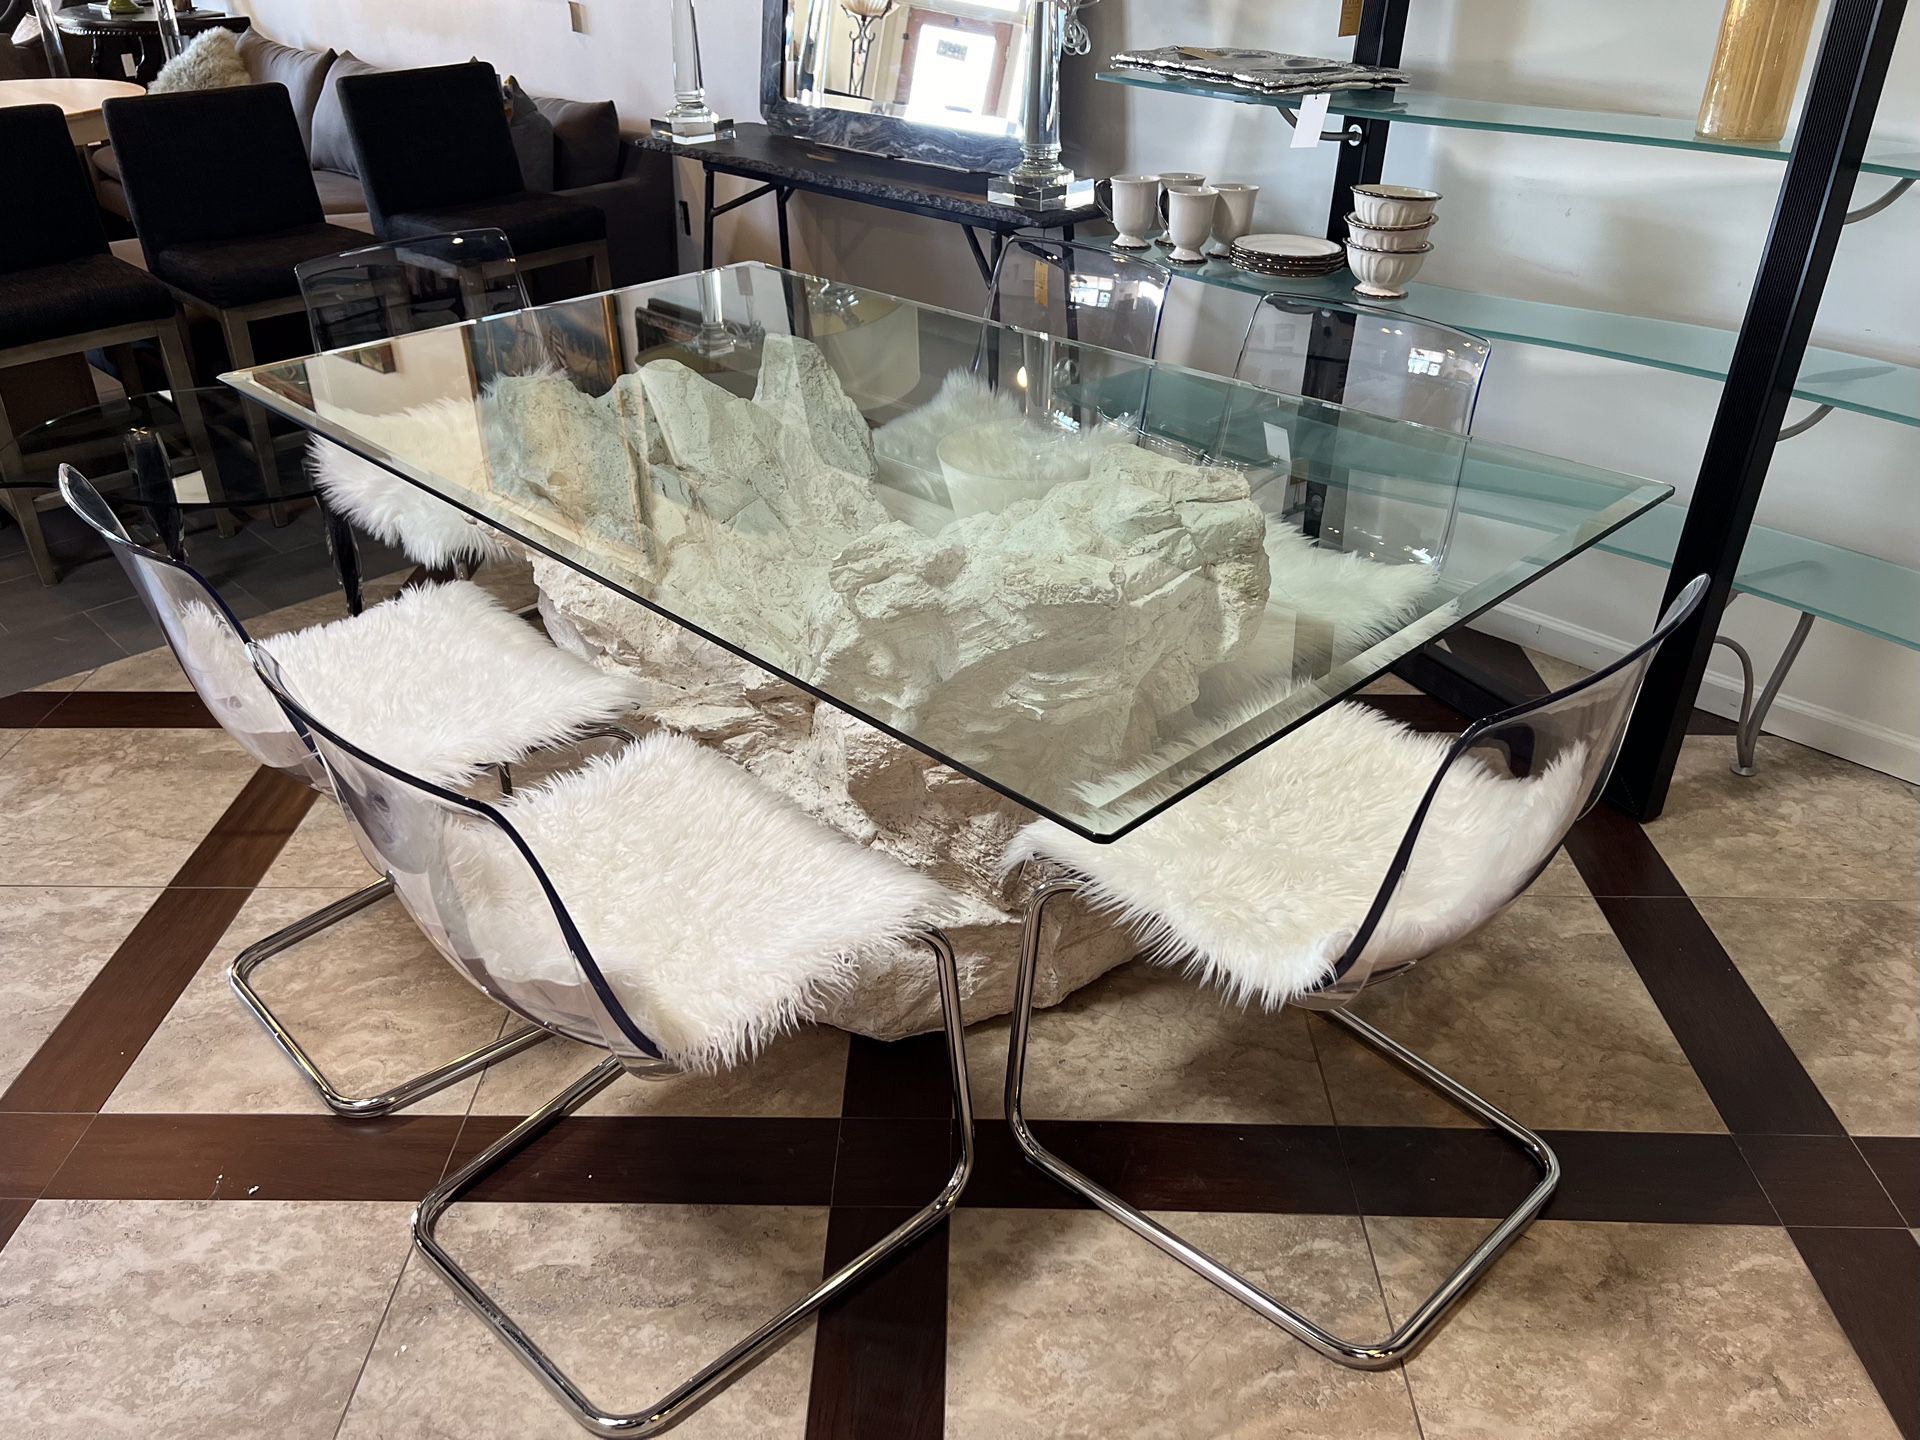 Postmodern Sirmos Faux Rock Dining Table And Chairs With Glass Top